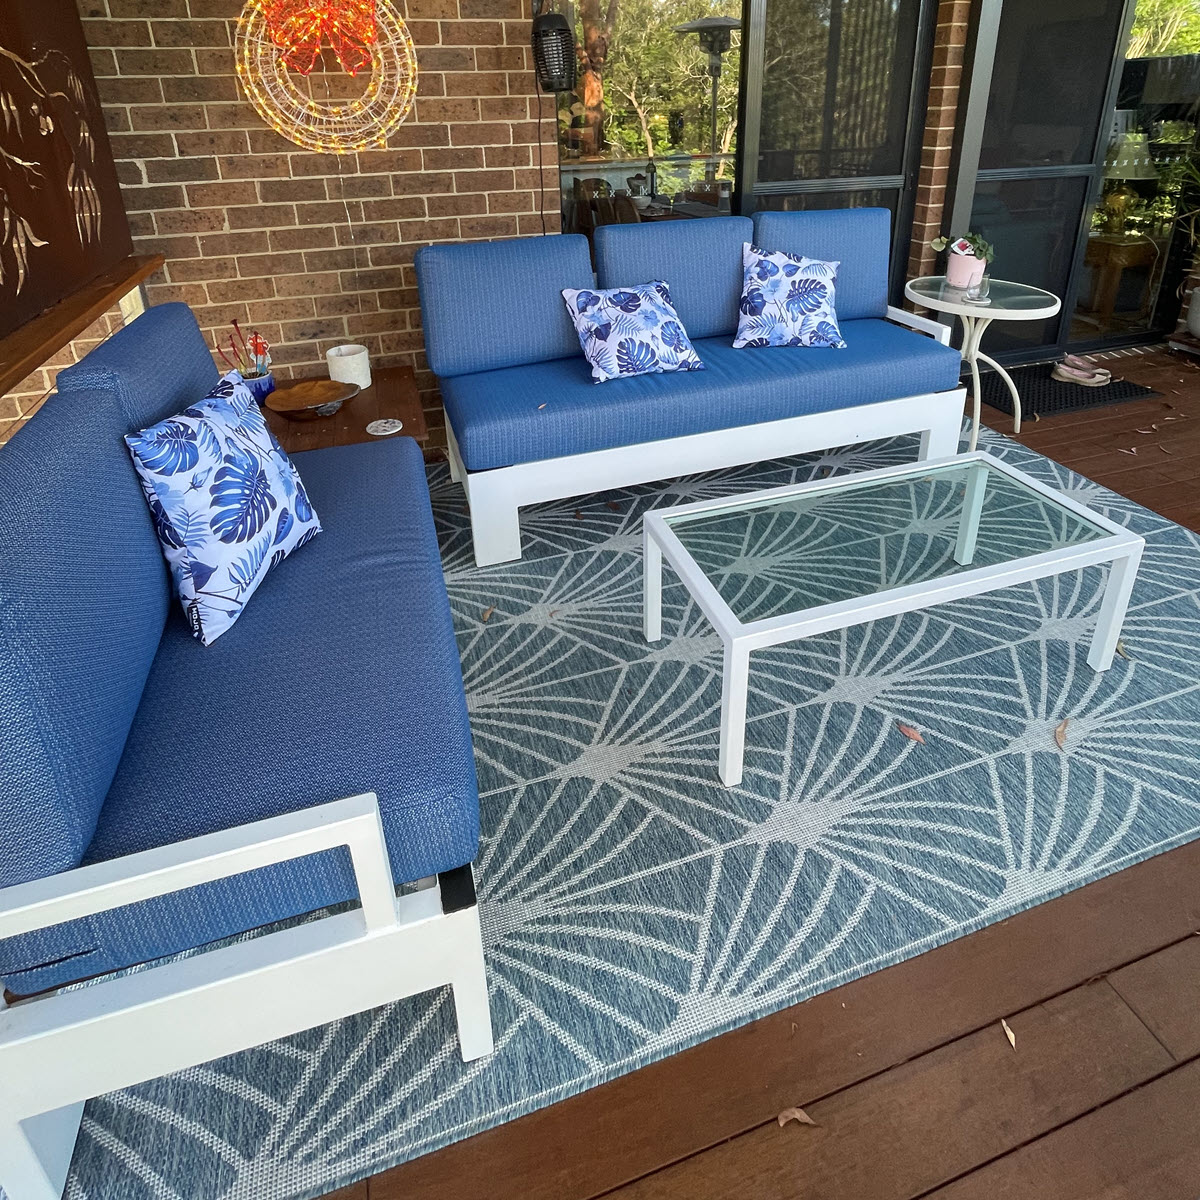 Blue patio furniture cushions with floral pattern throw pillows on wooden decking.